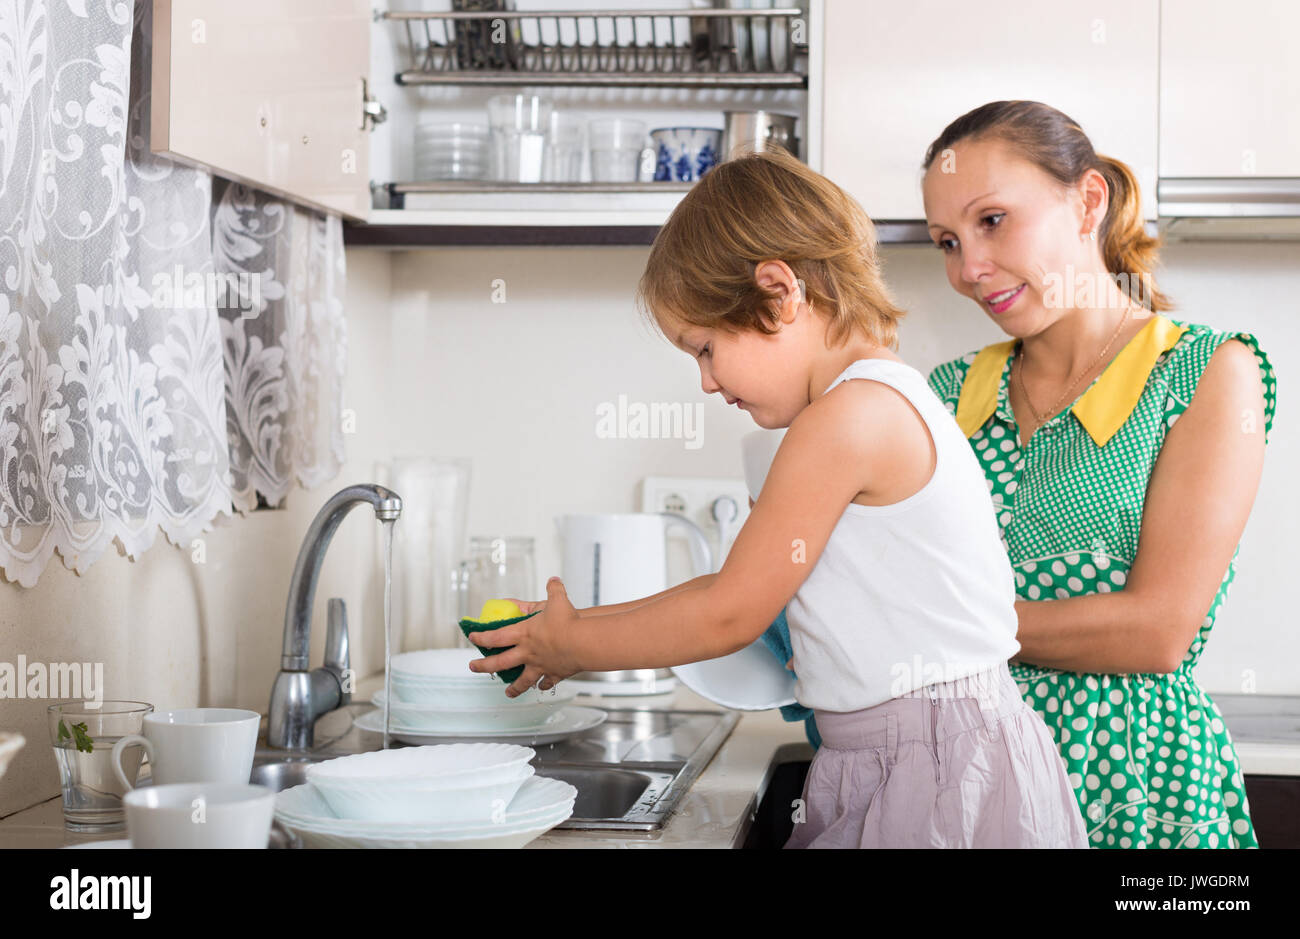 https://c8.alamy.com/comp/JWGDRM/little-daughter-helping-smiling-mother-washing-dishes-in-the-kitchen-JWGDRM.jpg